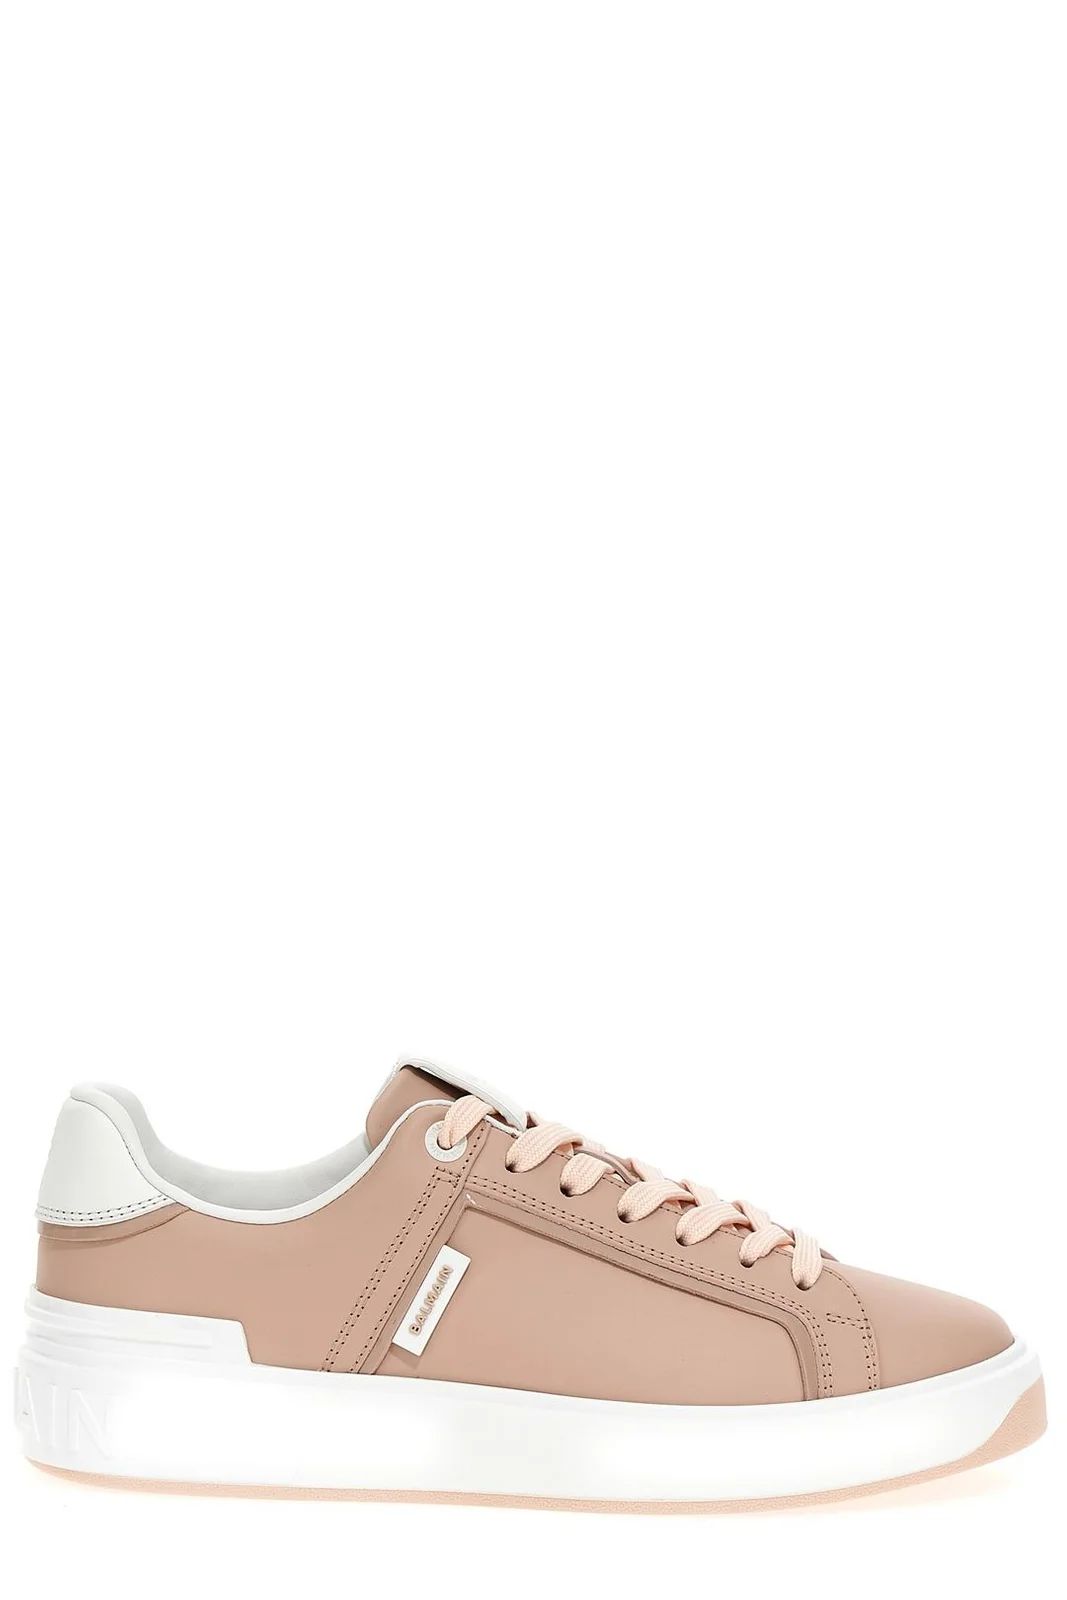 Balmain B-Court Lace-Up Sneakers | Cettire Global